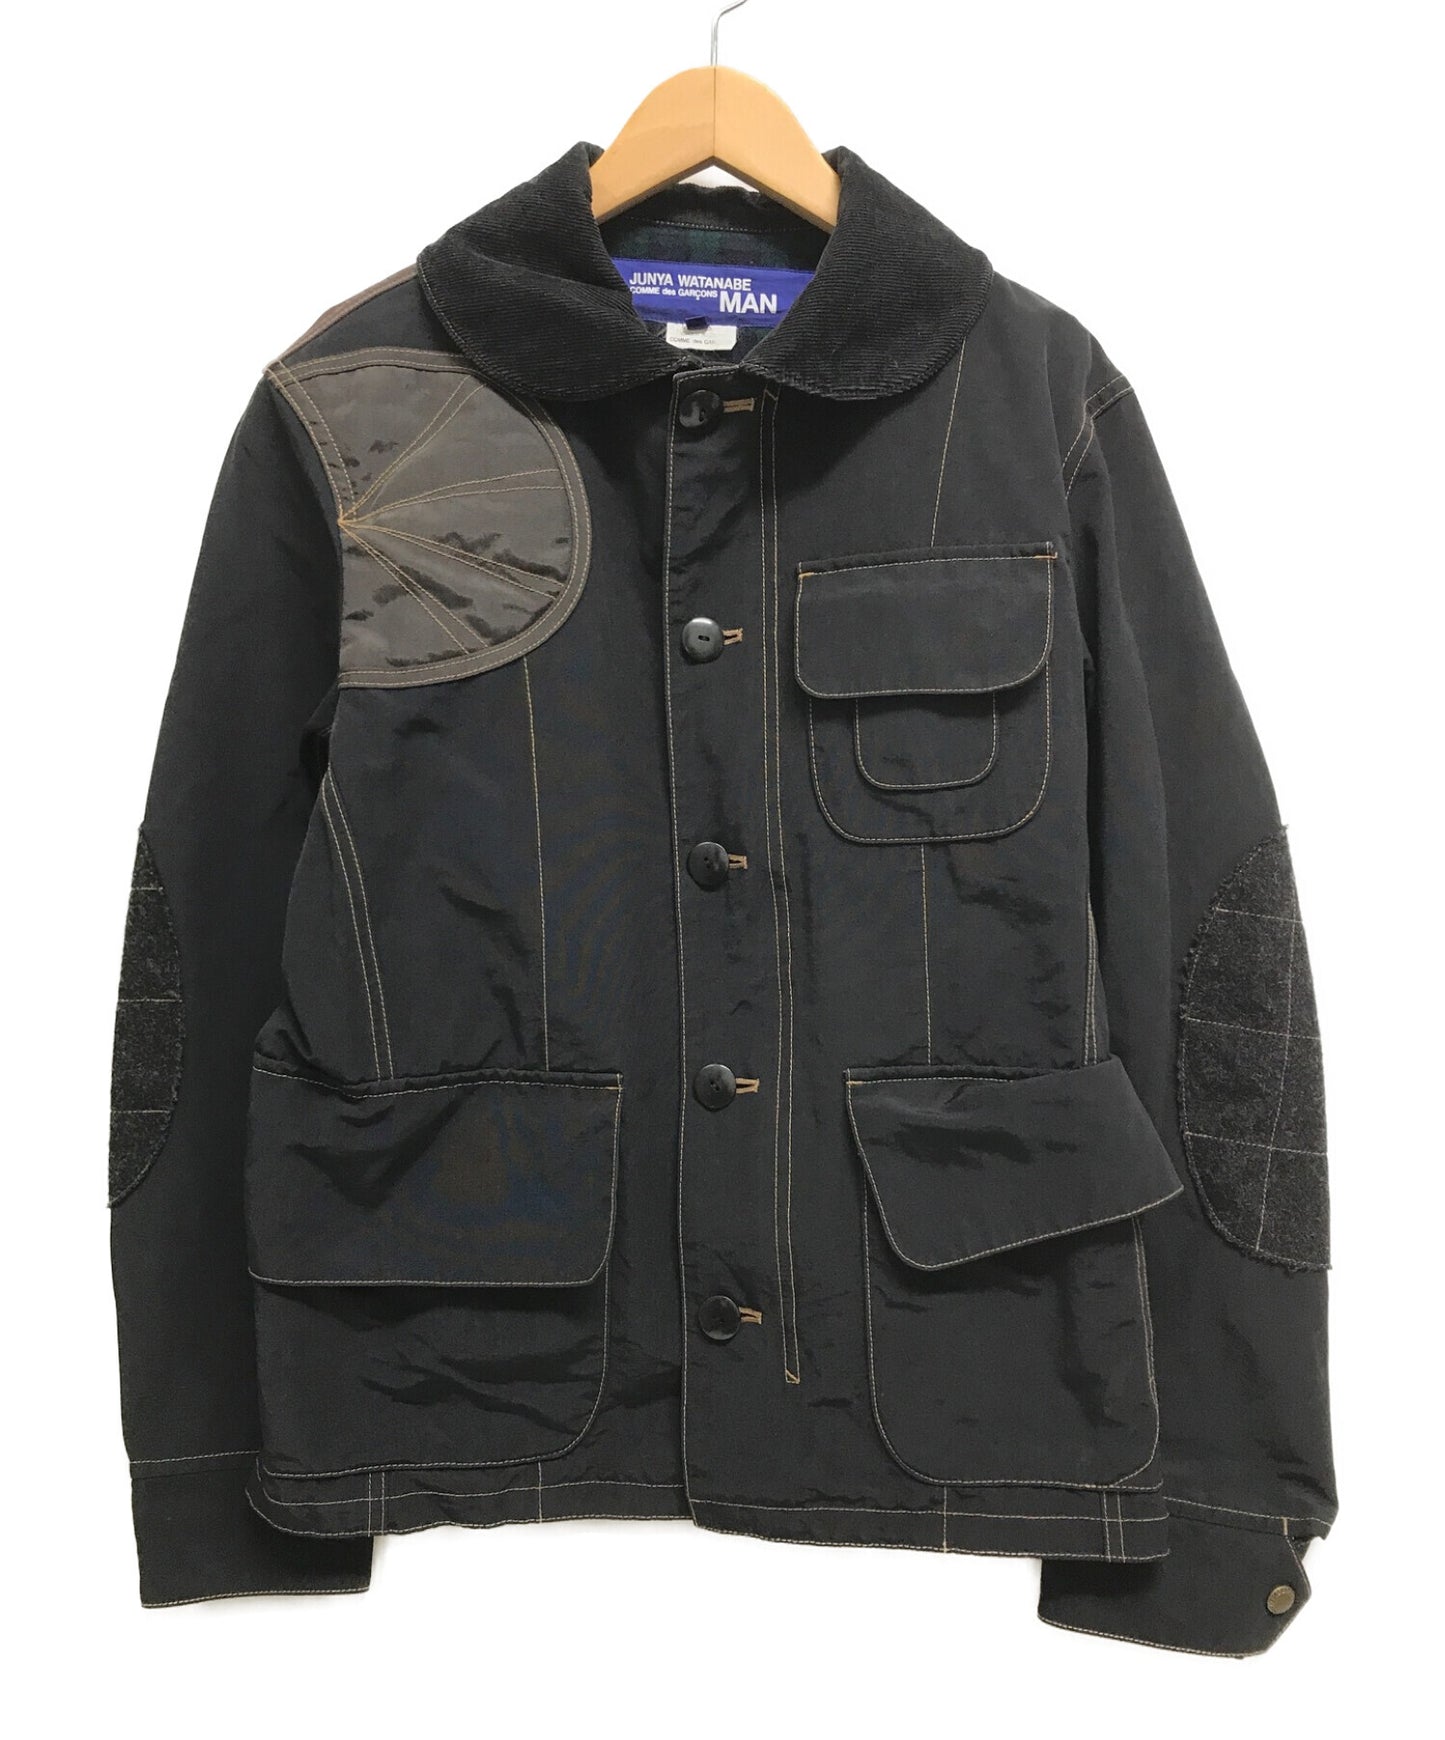 Comme des Garcons Junya Watanabe Man Coverall Jacket Elbow Patch WD-J016